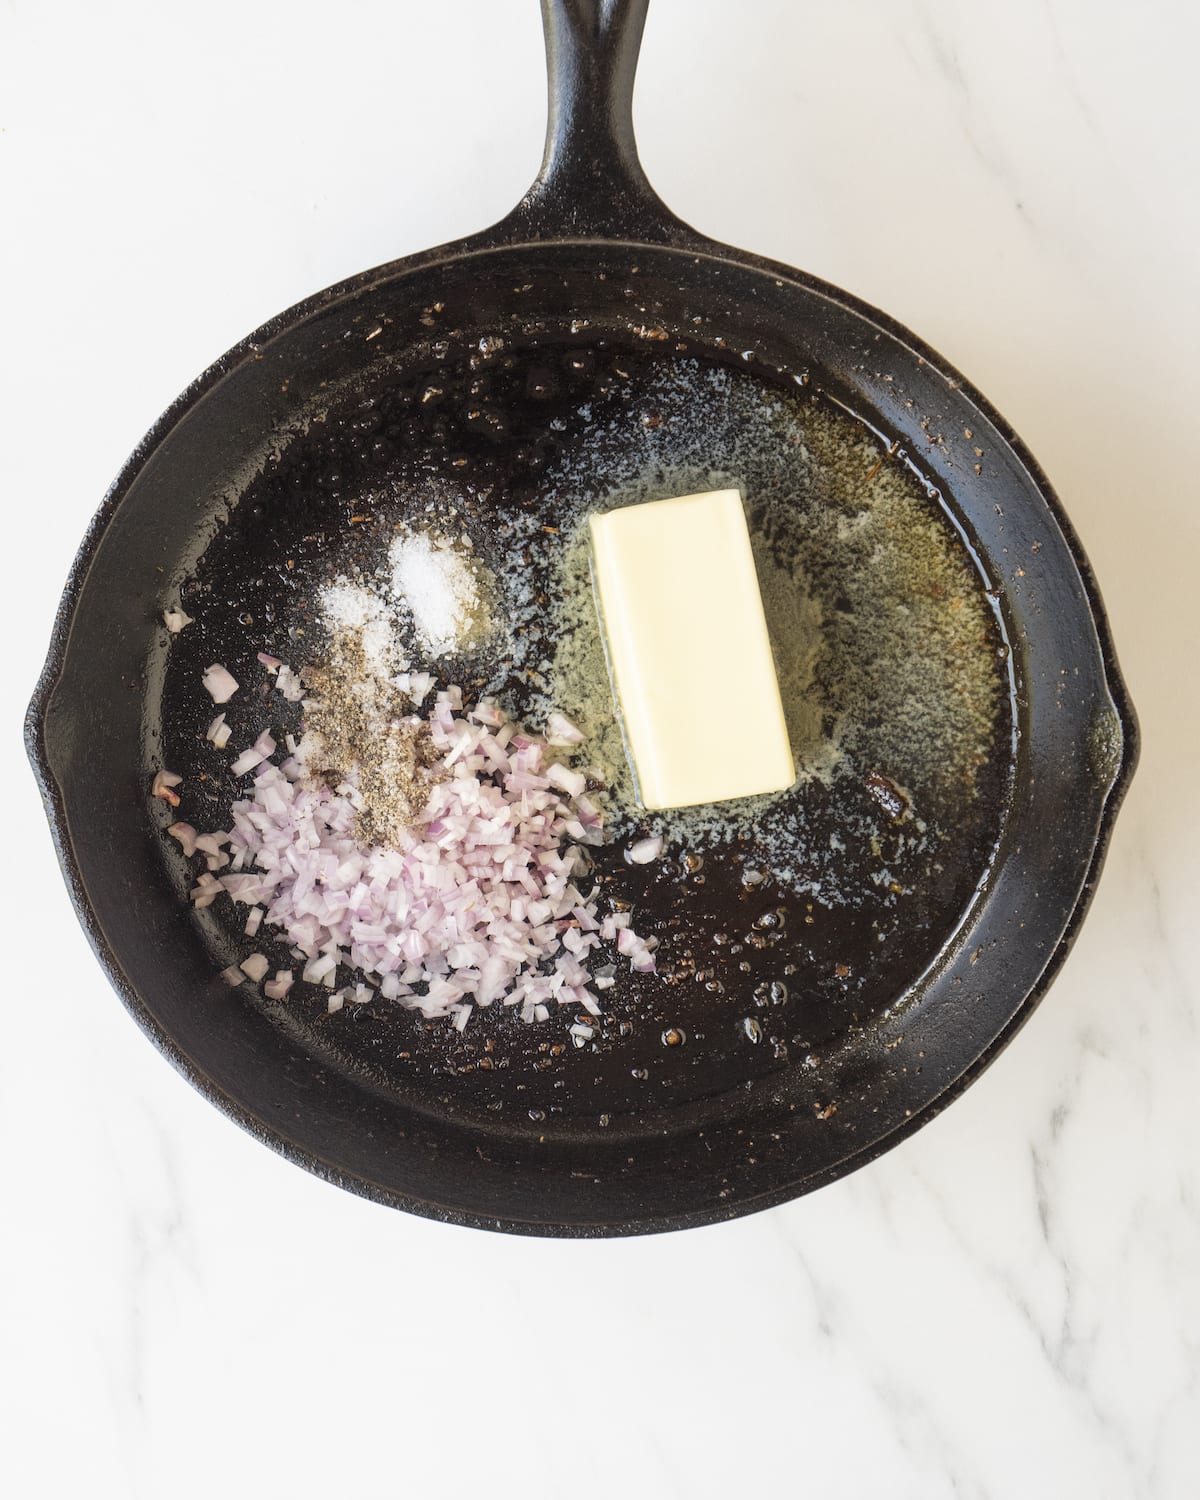 A cast iron skillet with butter, shallots, salt and pepper on a white marbled countertop.